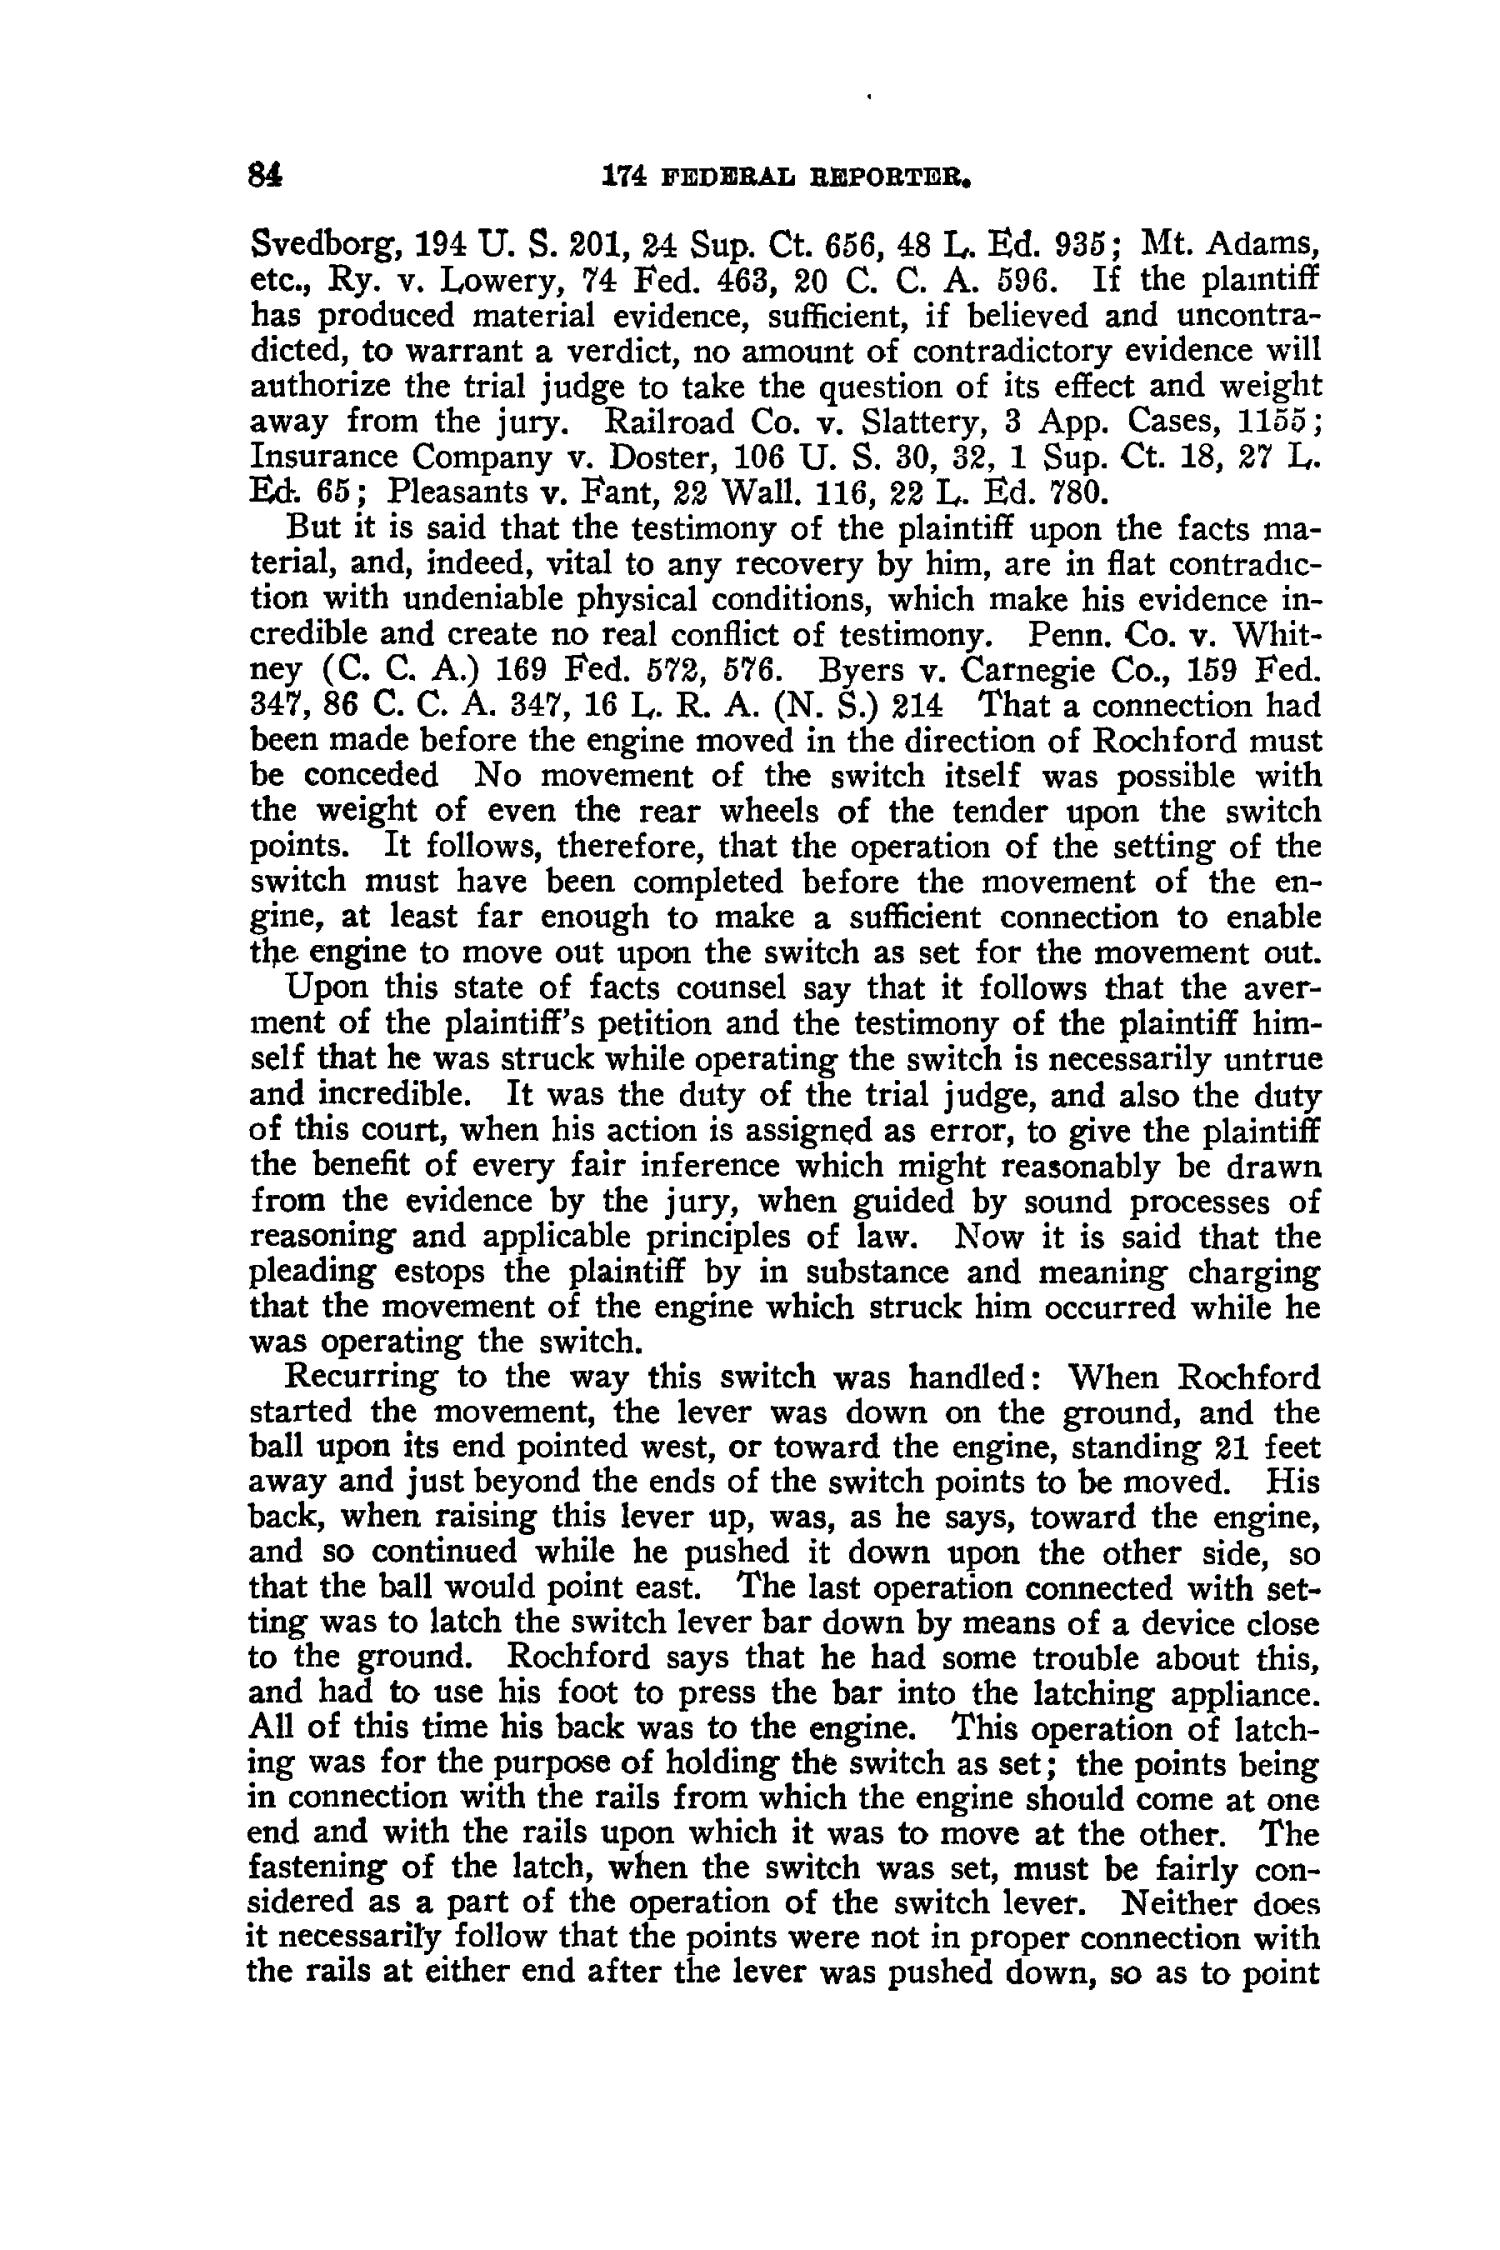 The Federal Reporter (Annotated), Volume 174: Cases Argued and Determined in the Circuit Courts of Appeals and Circuit and District Courts of the United States. January-March, 1910.
                                                
                                                    84
                                                